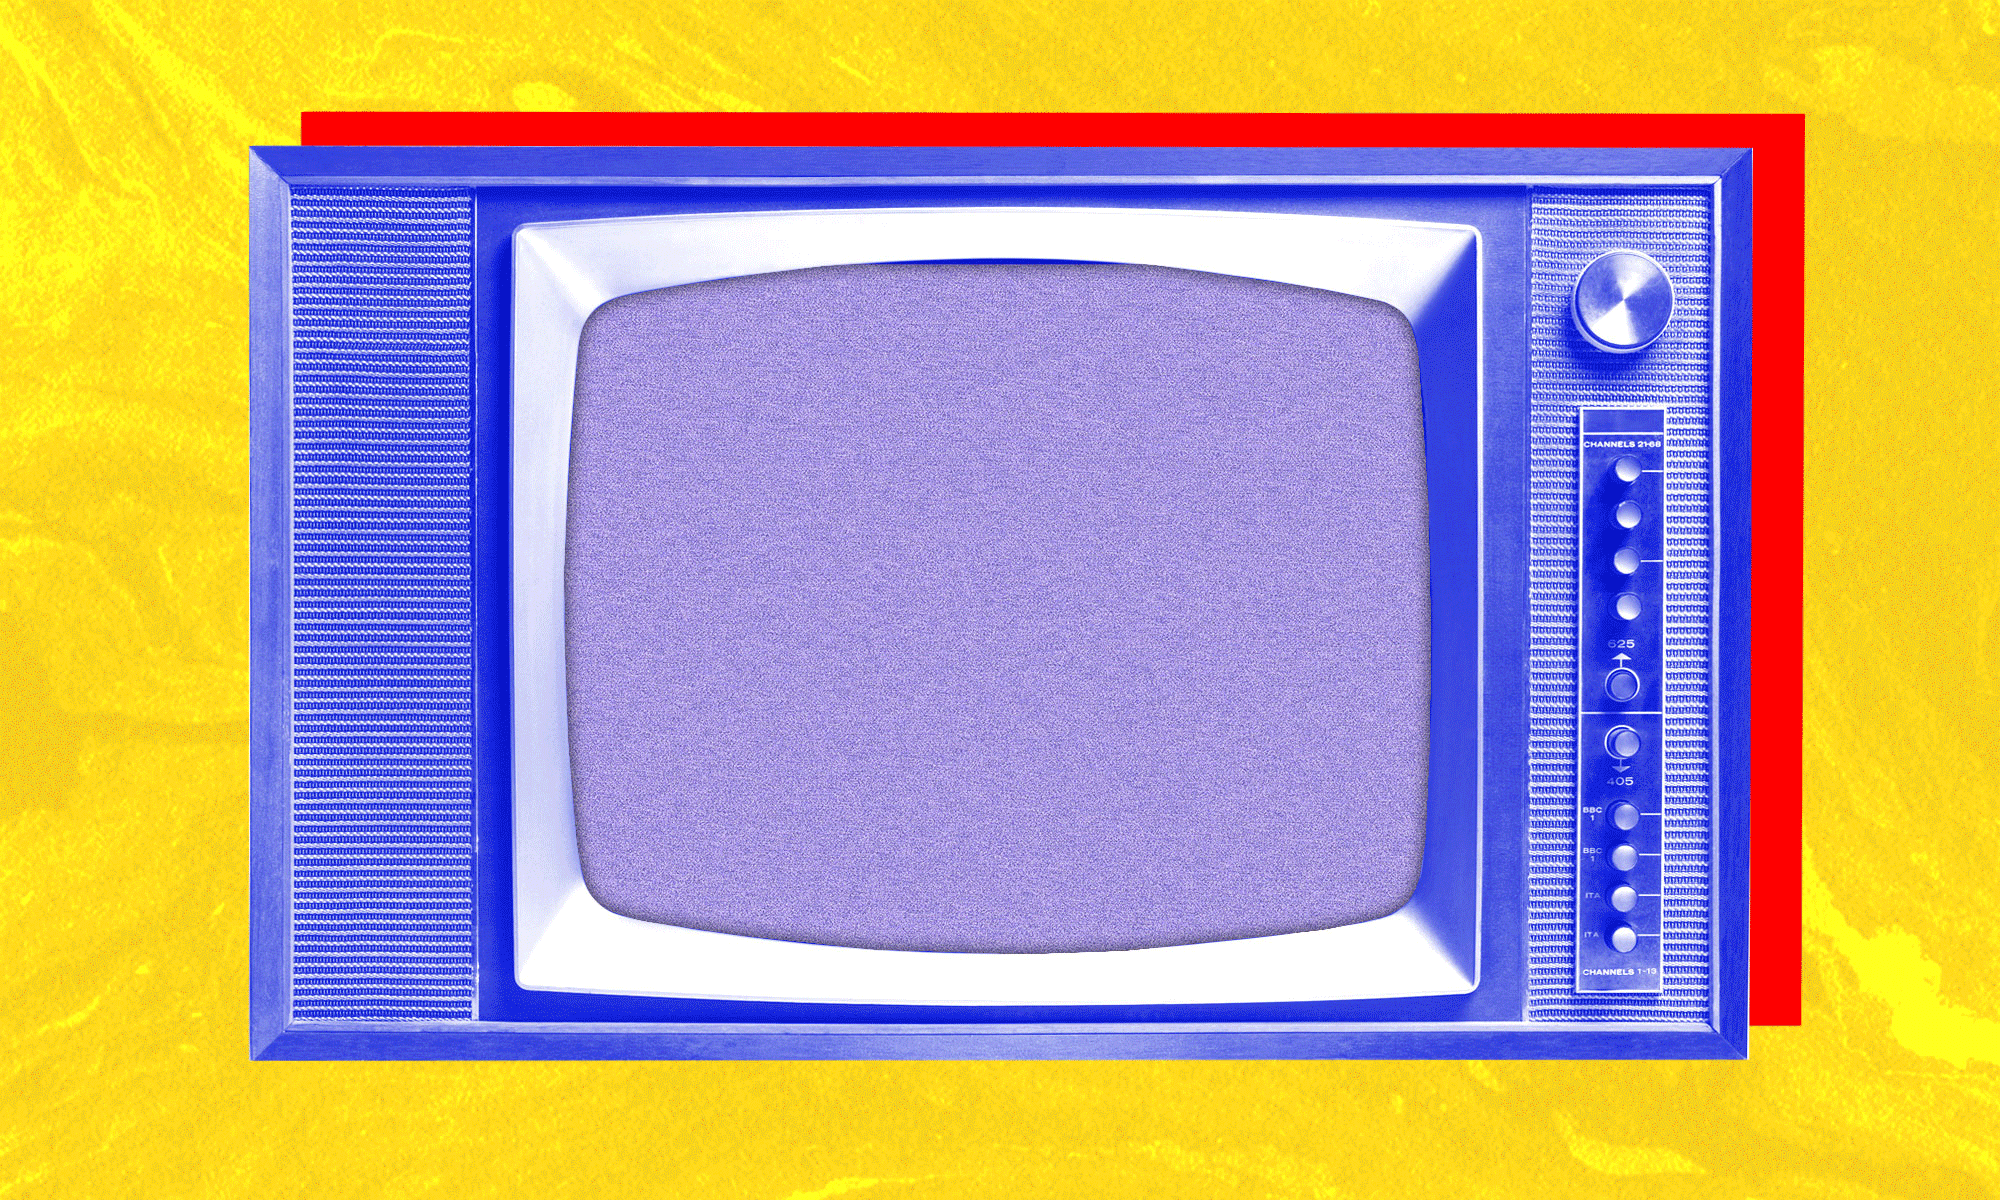 A gif featuring a neon purple television with rotating stills from various Criterion Channel movies.